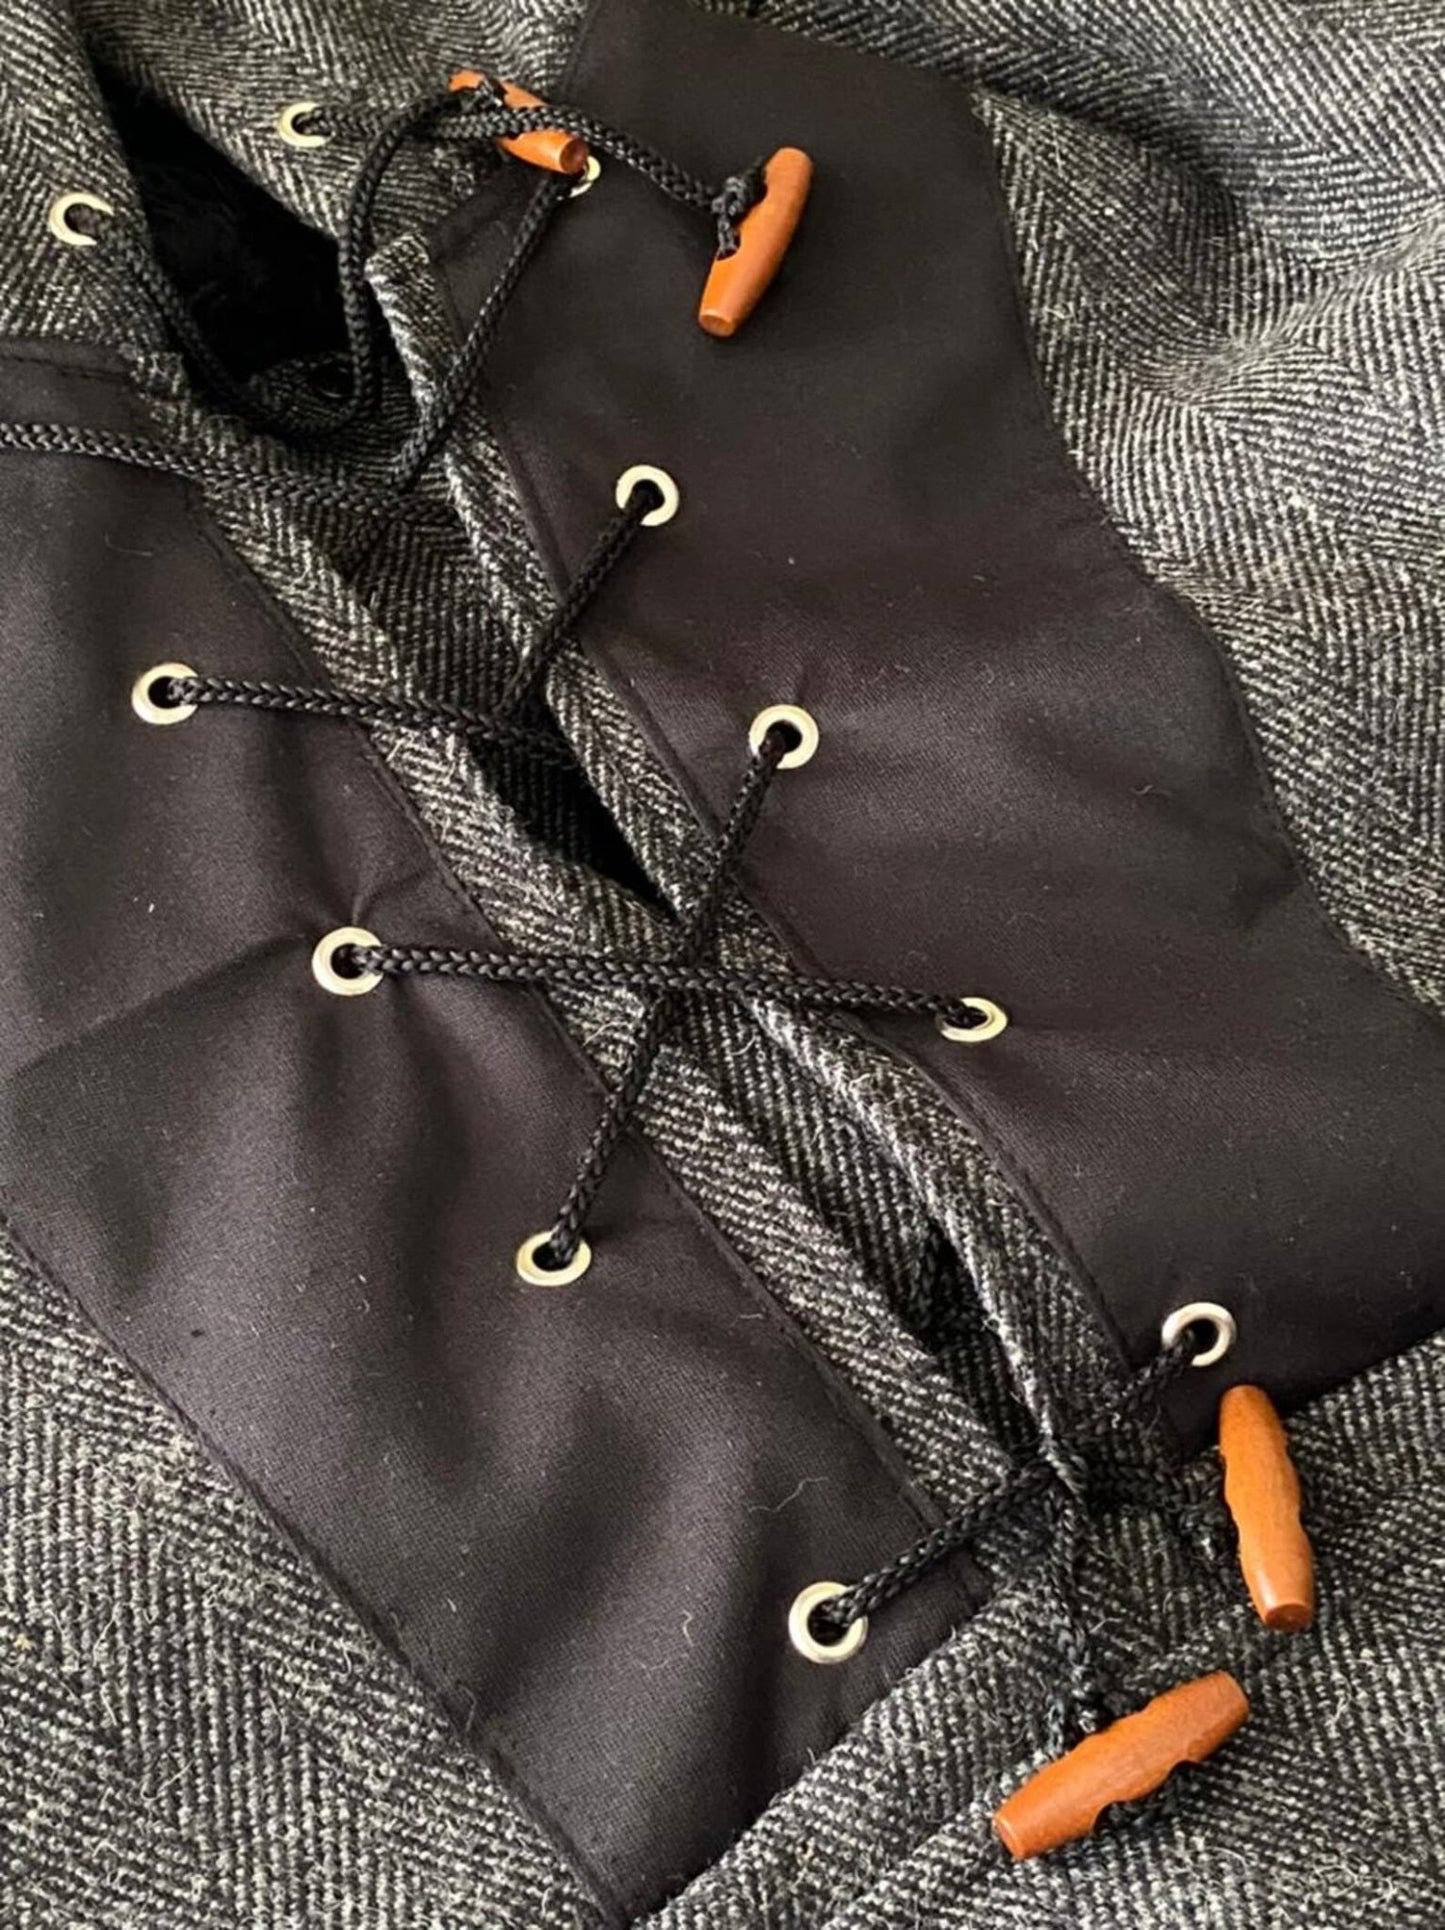 Wool Anorak | Bushcraft | Camping | Anorak , You will be ready for adventure, Best Protection For Cold, Full Handmade  99percenthandmade   